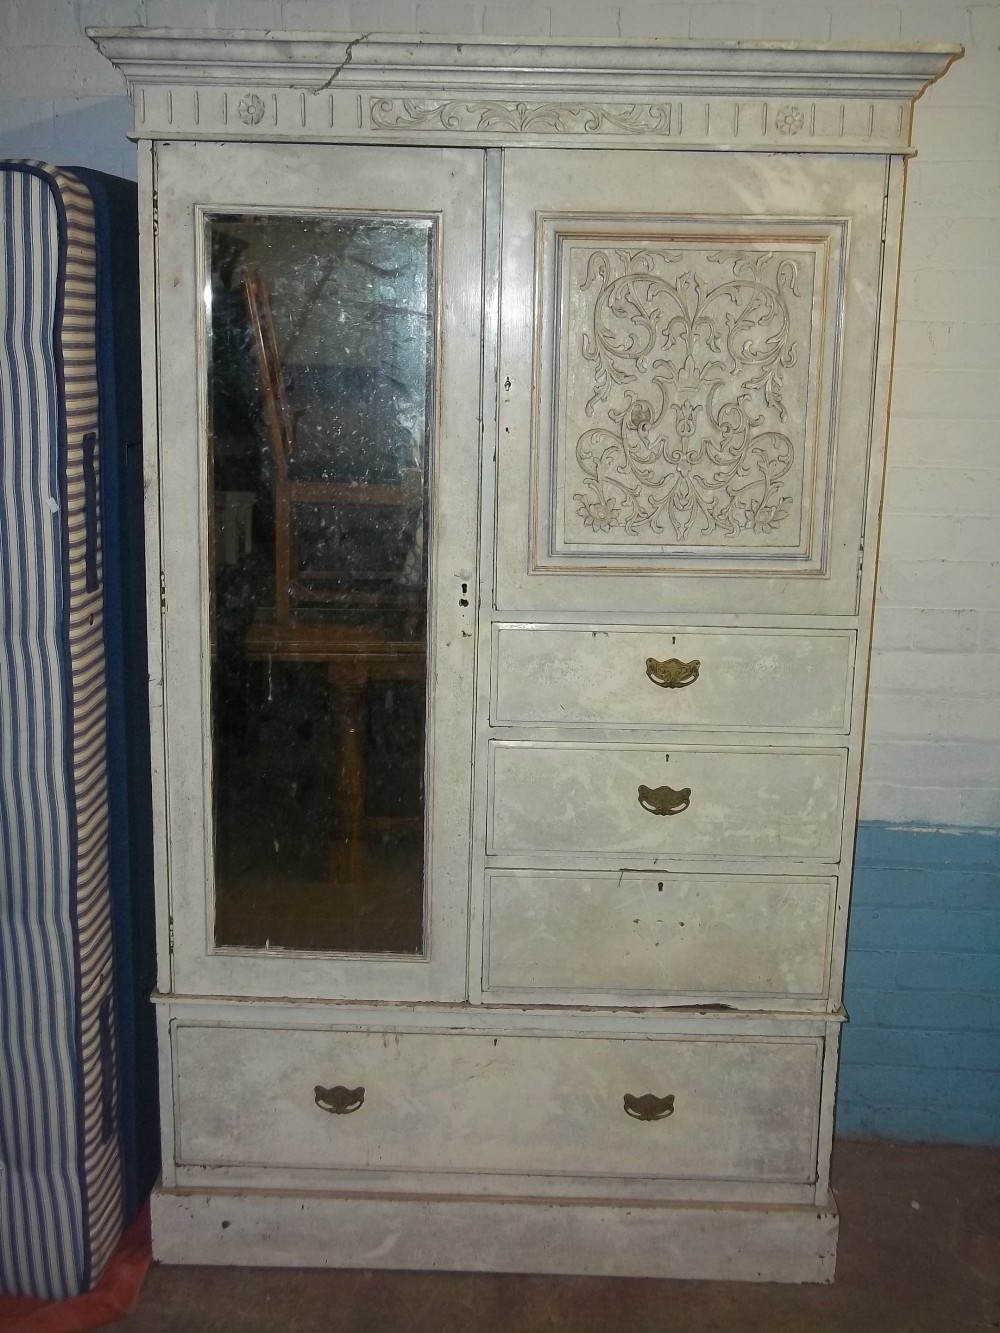 A PAINTED WARDROBE WITH CARVED DETAIL